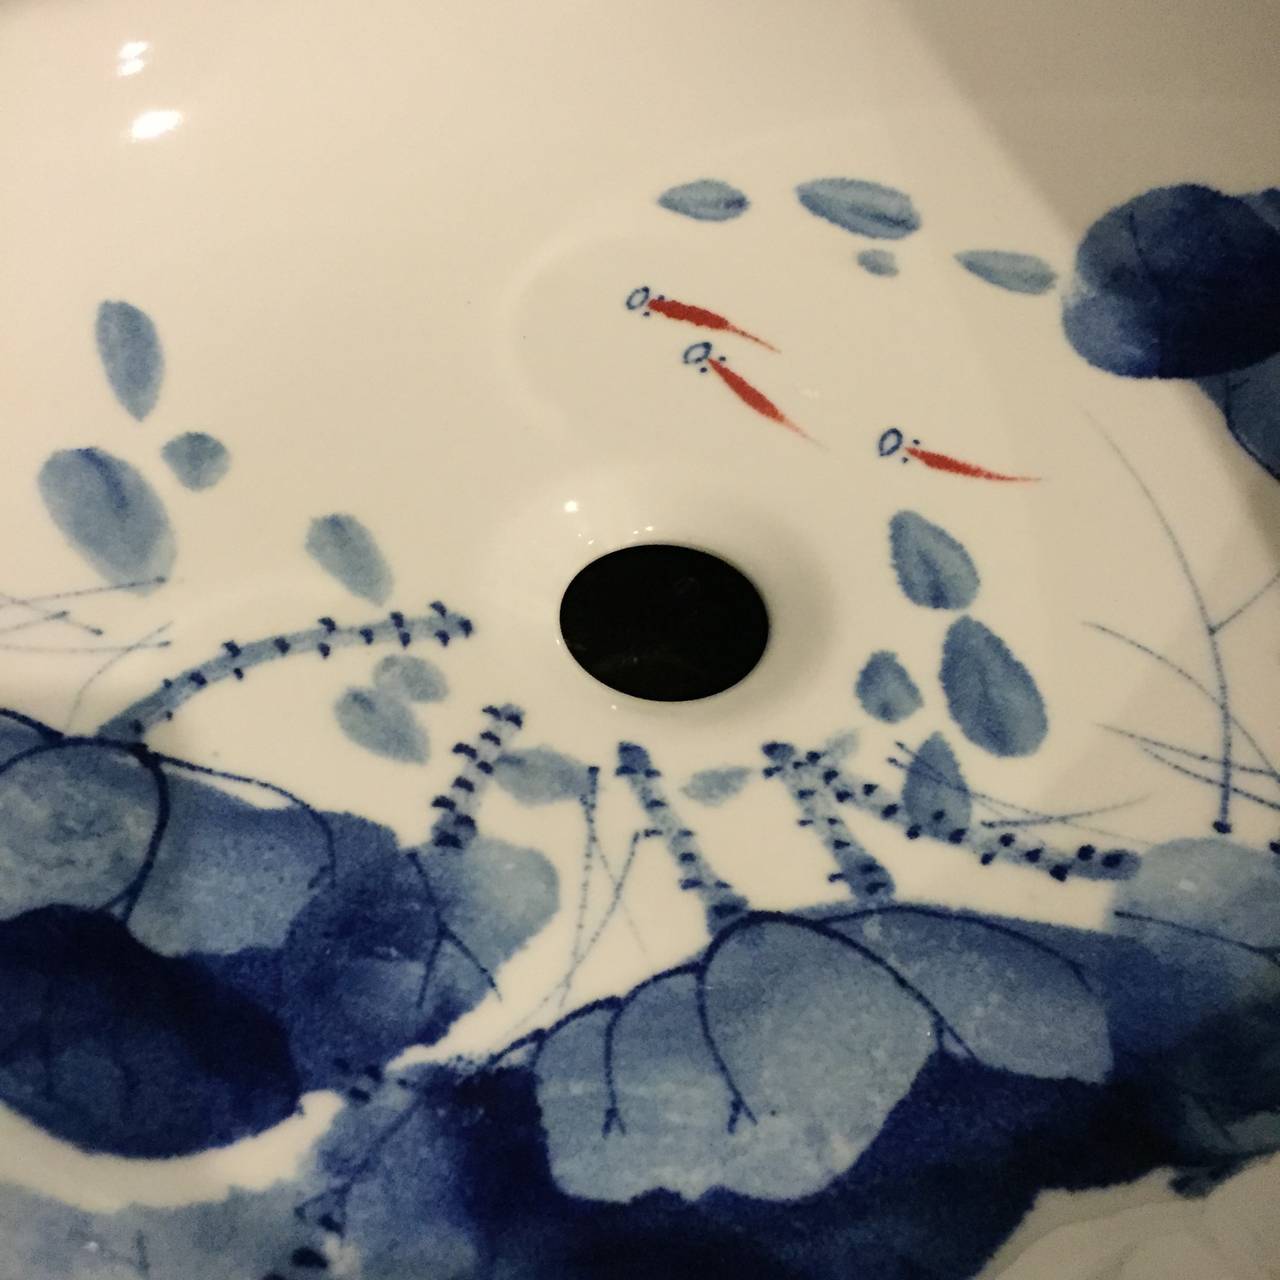 This pair of beautiful sinks are the only pair that we have. Completely hand painted, the bowls depict groups of fish swimming amid lotuses. The use of inky blue is a classic Chinese watercolor approach. Details such as folds of the leaves, shrimps,